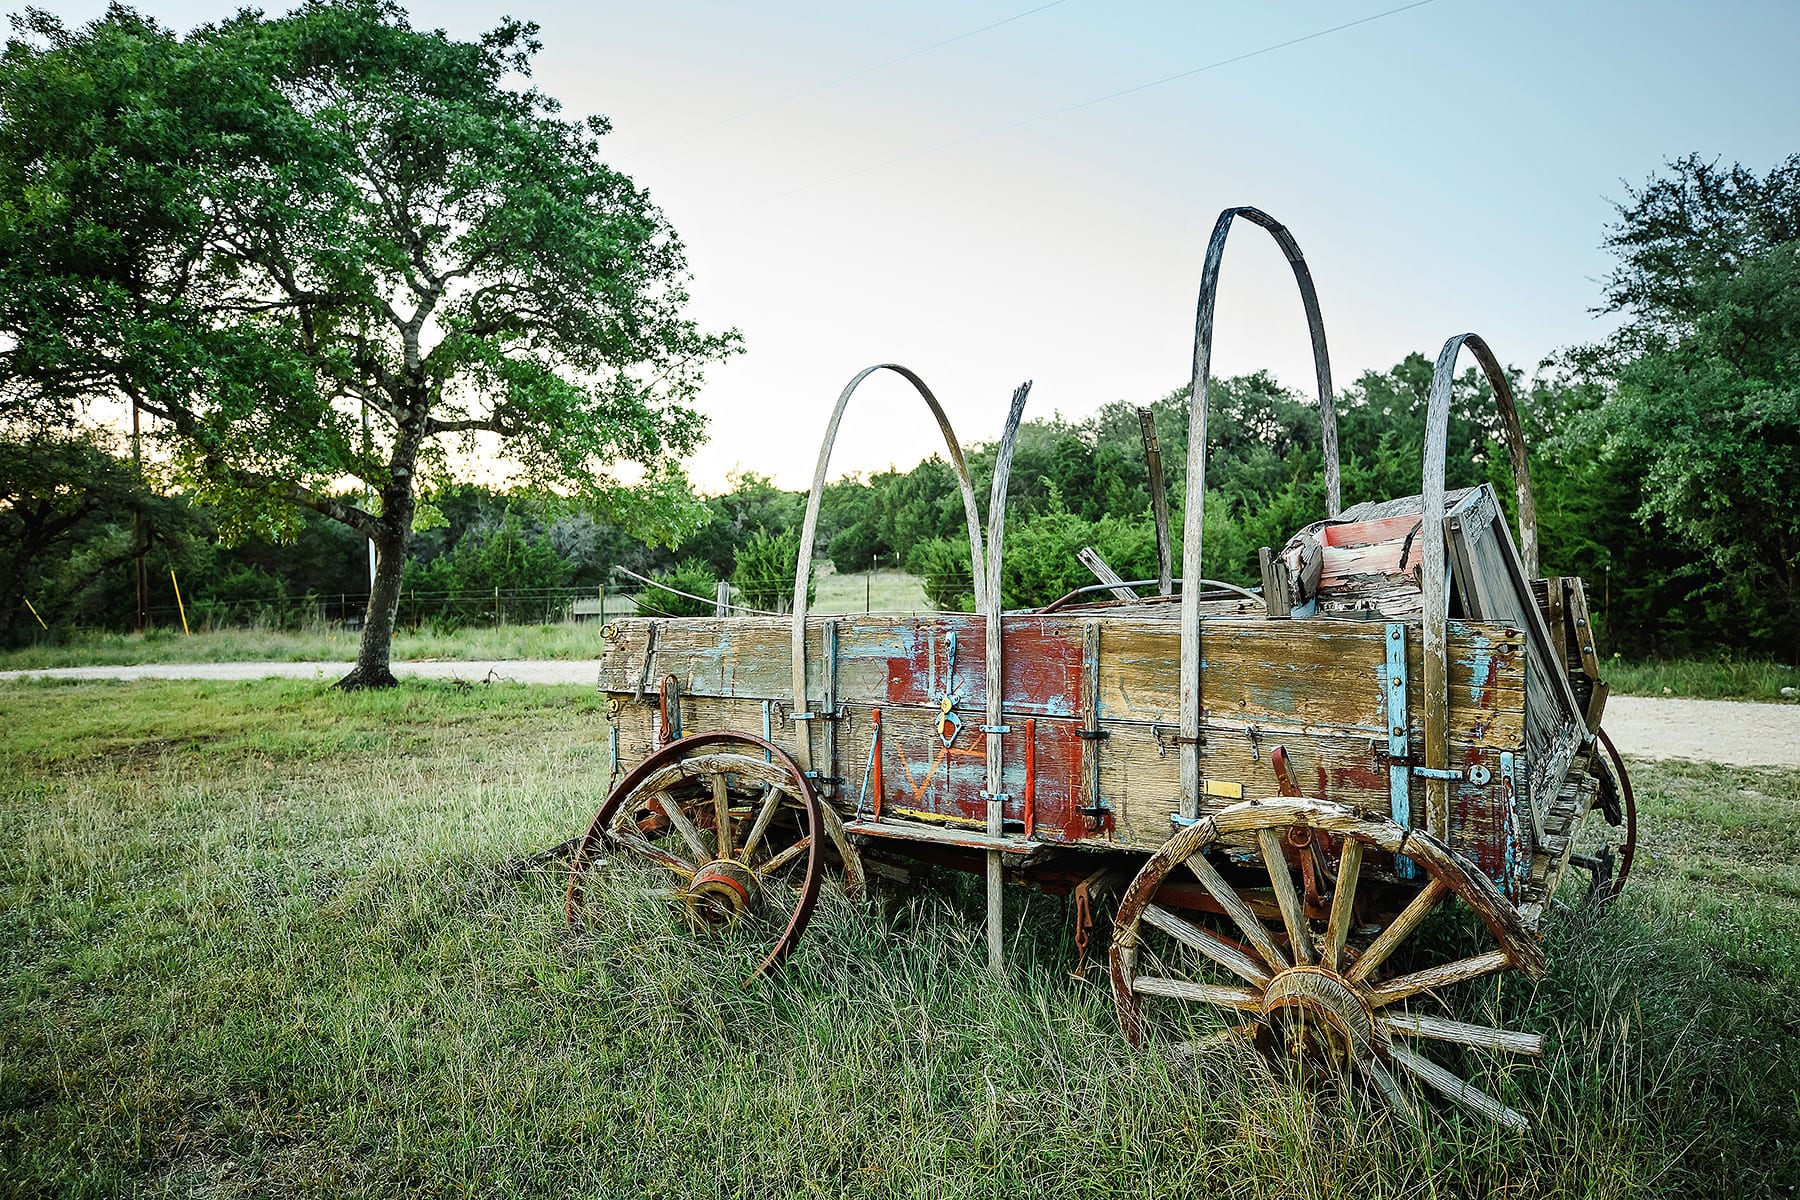 Wanderin Star Farms in Dripping Springs, Texas AirBNB vacation rental wagon 